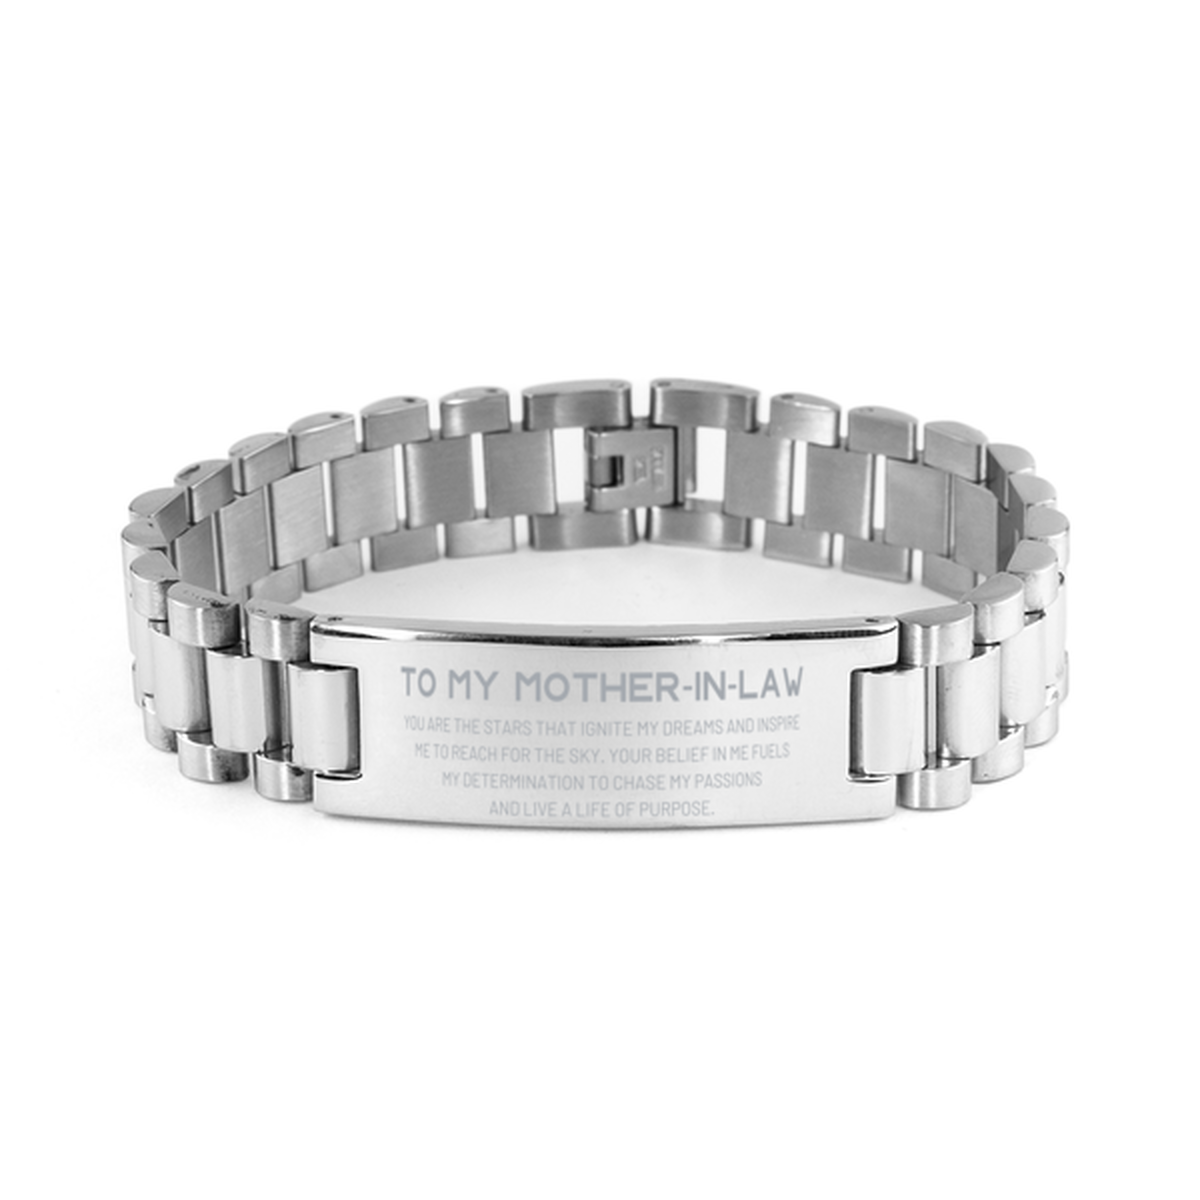 To My Mother-In-Law Ladder Stainless Steel Bracelet, You are the stars that ignite my dreams and inspire me to reach for the sky, Birthday Unique Gifts For Mother-In-Law, Thank You Gifts For Mother-In-Law